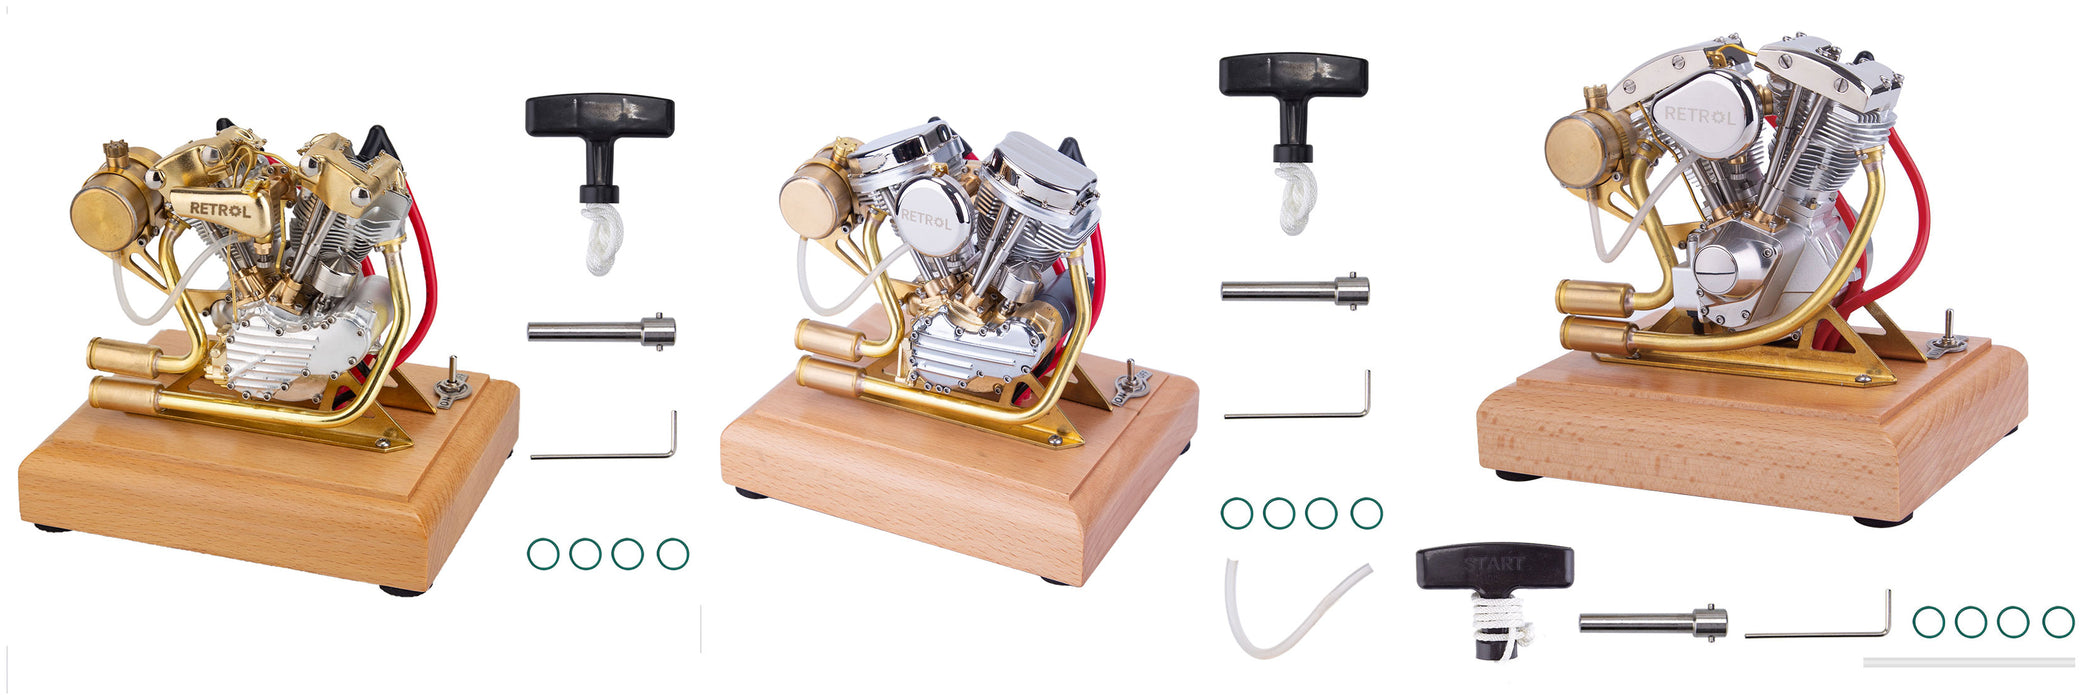 RETROL 4.2CC V-Twin Double-cylinder Four-stroke Gasoline Engine Internal Combustion Engine Model for Motorcycle-Gift Collection